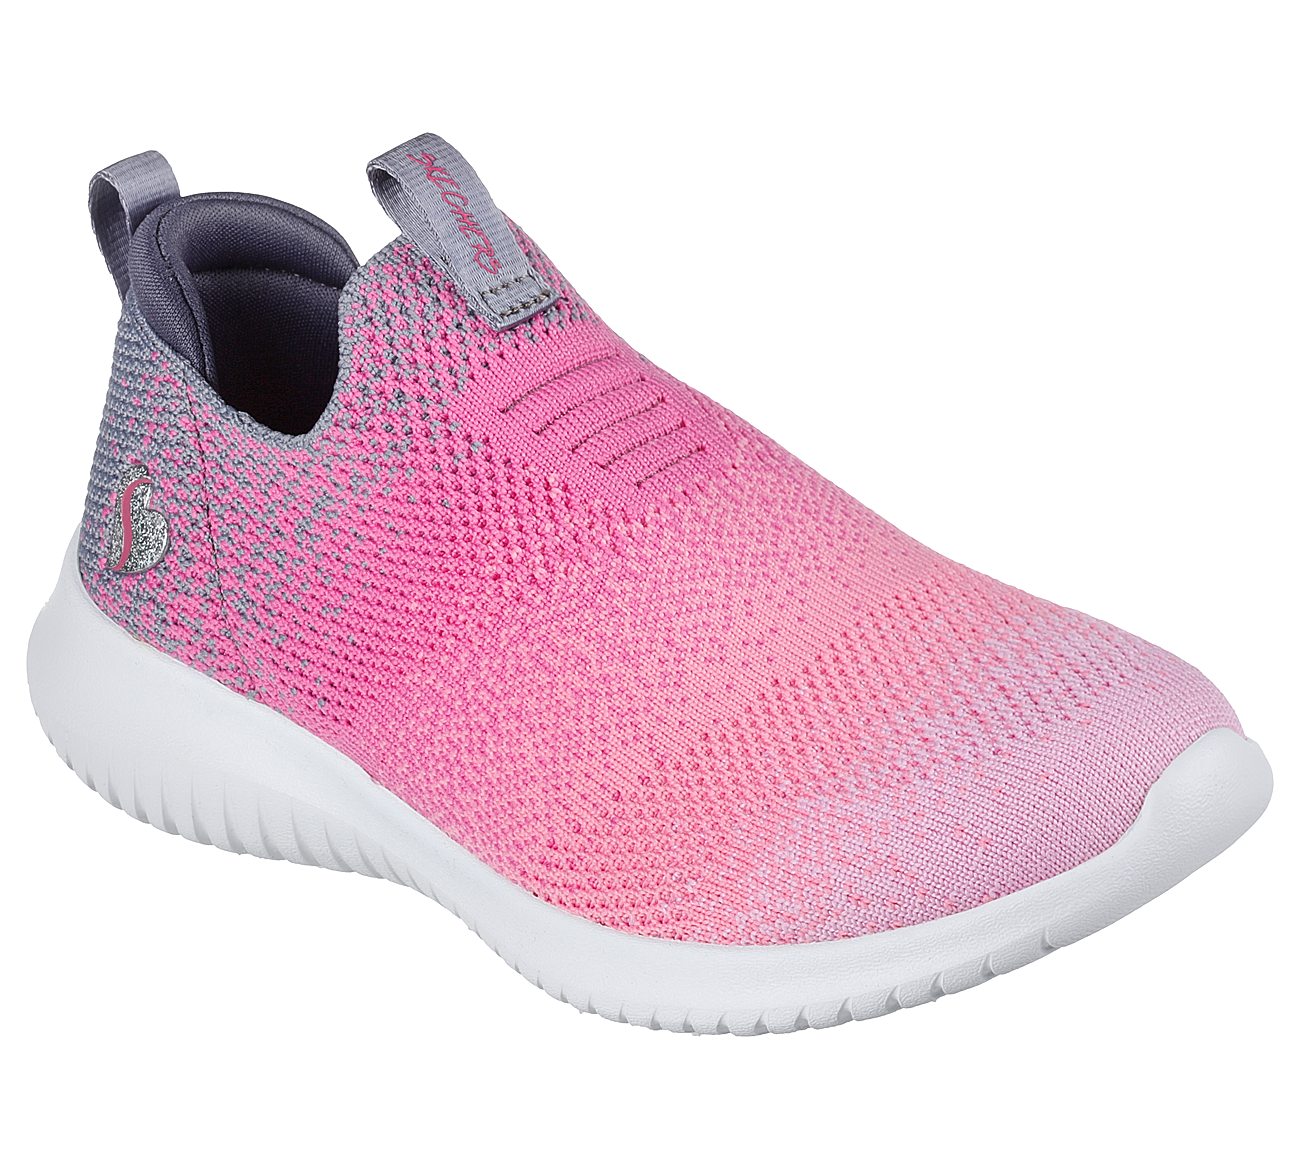 ULTRA FLEX - COLOR PERFECT, PINK/MULTI Footwear Lateral View